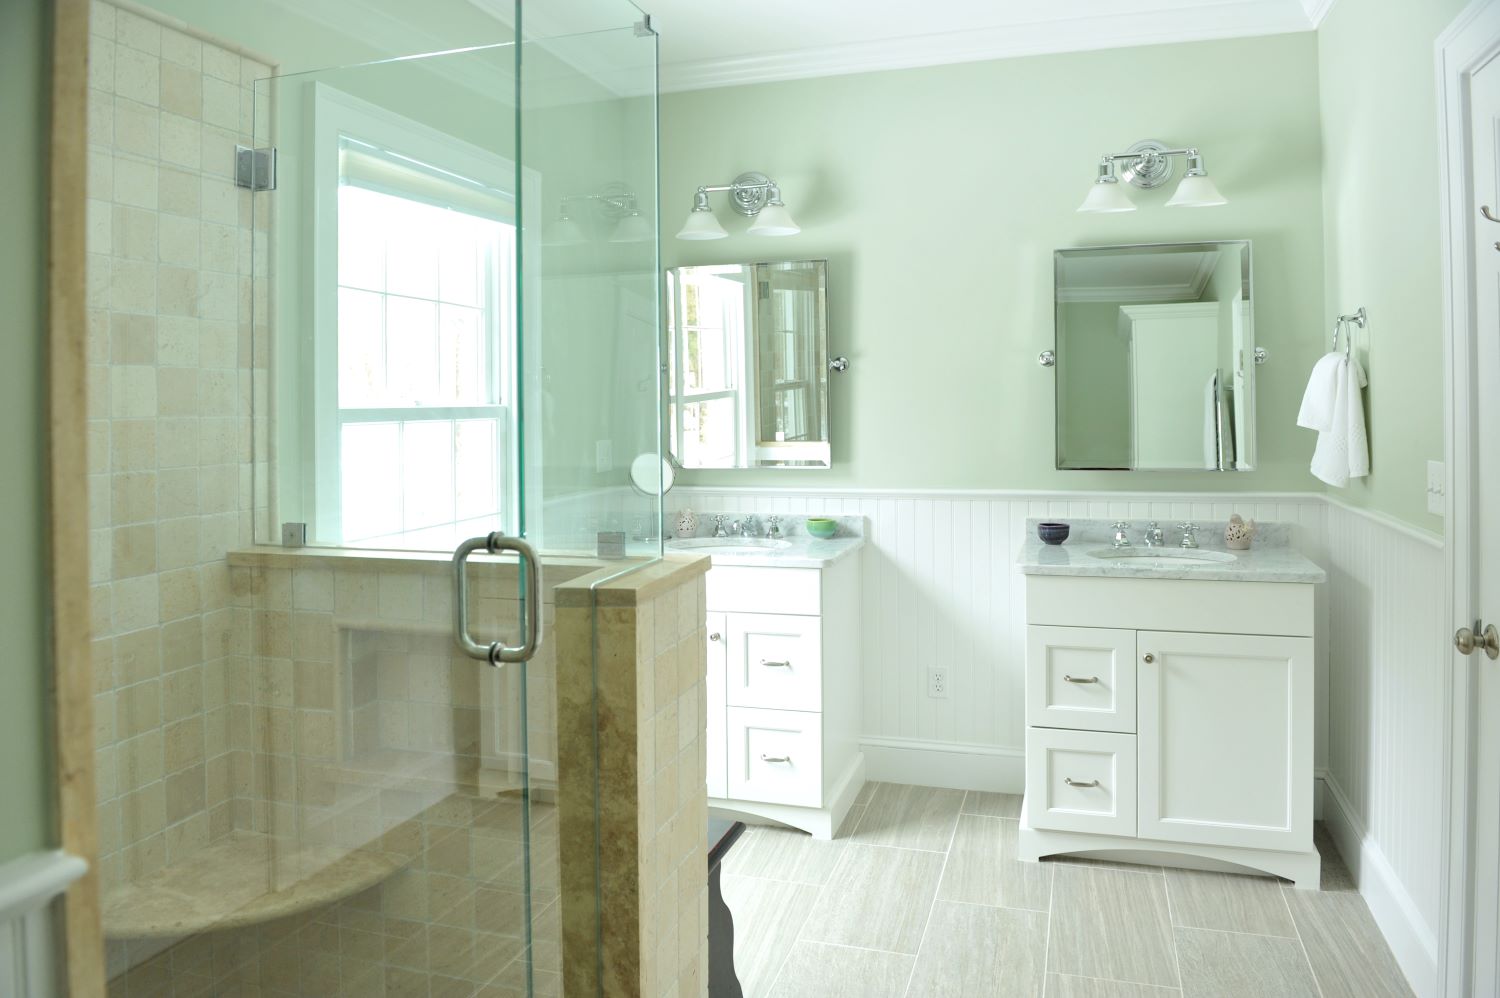 Bathroom renovation with his and hers vanities